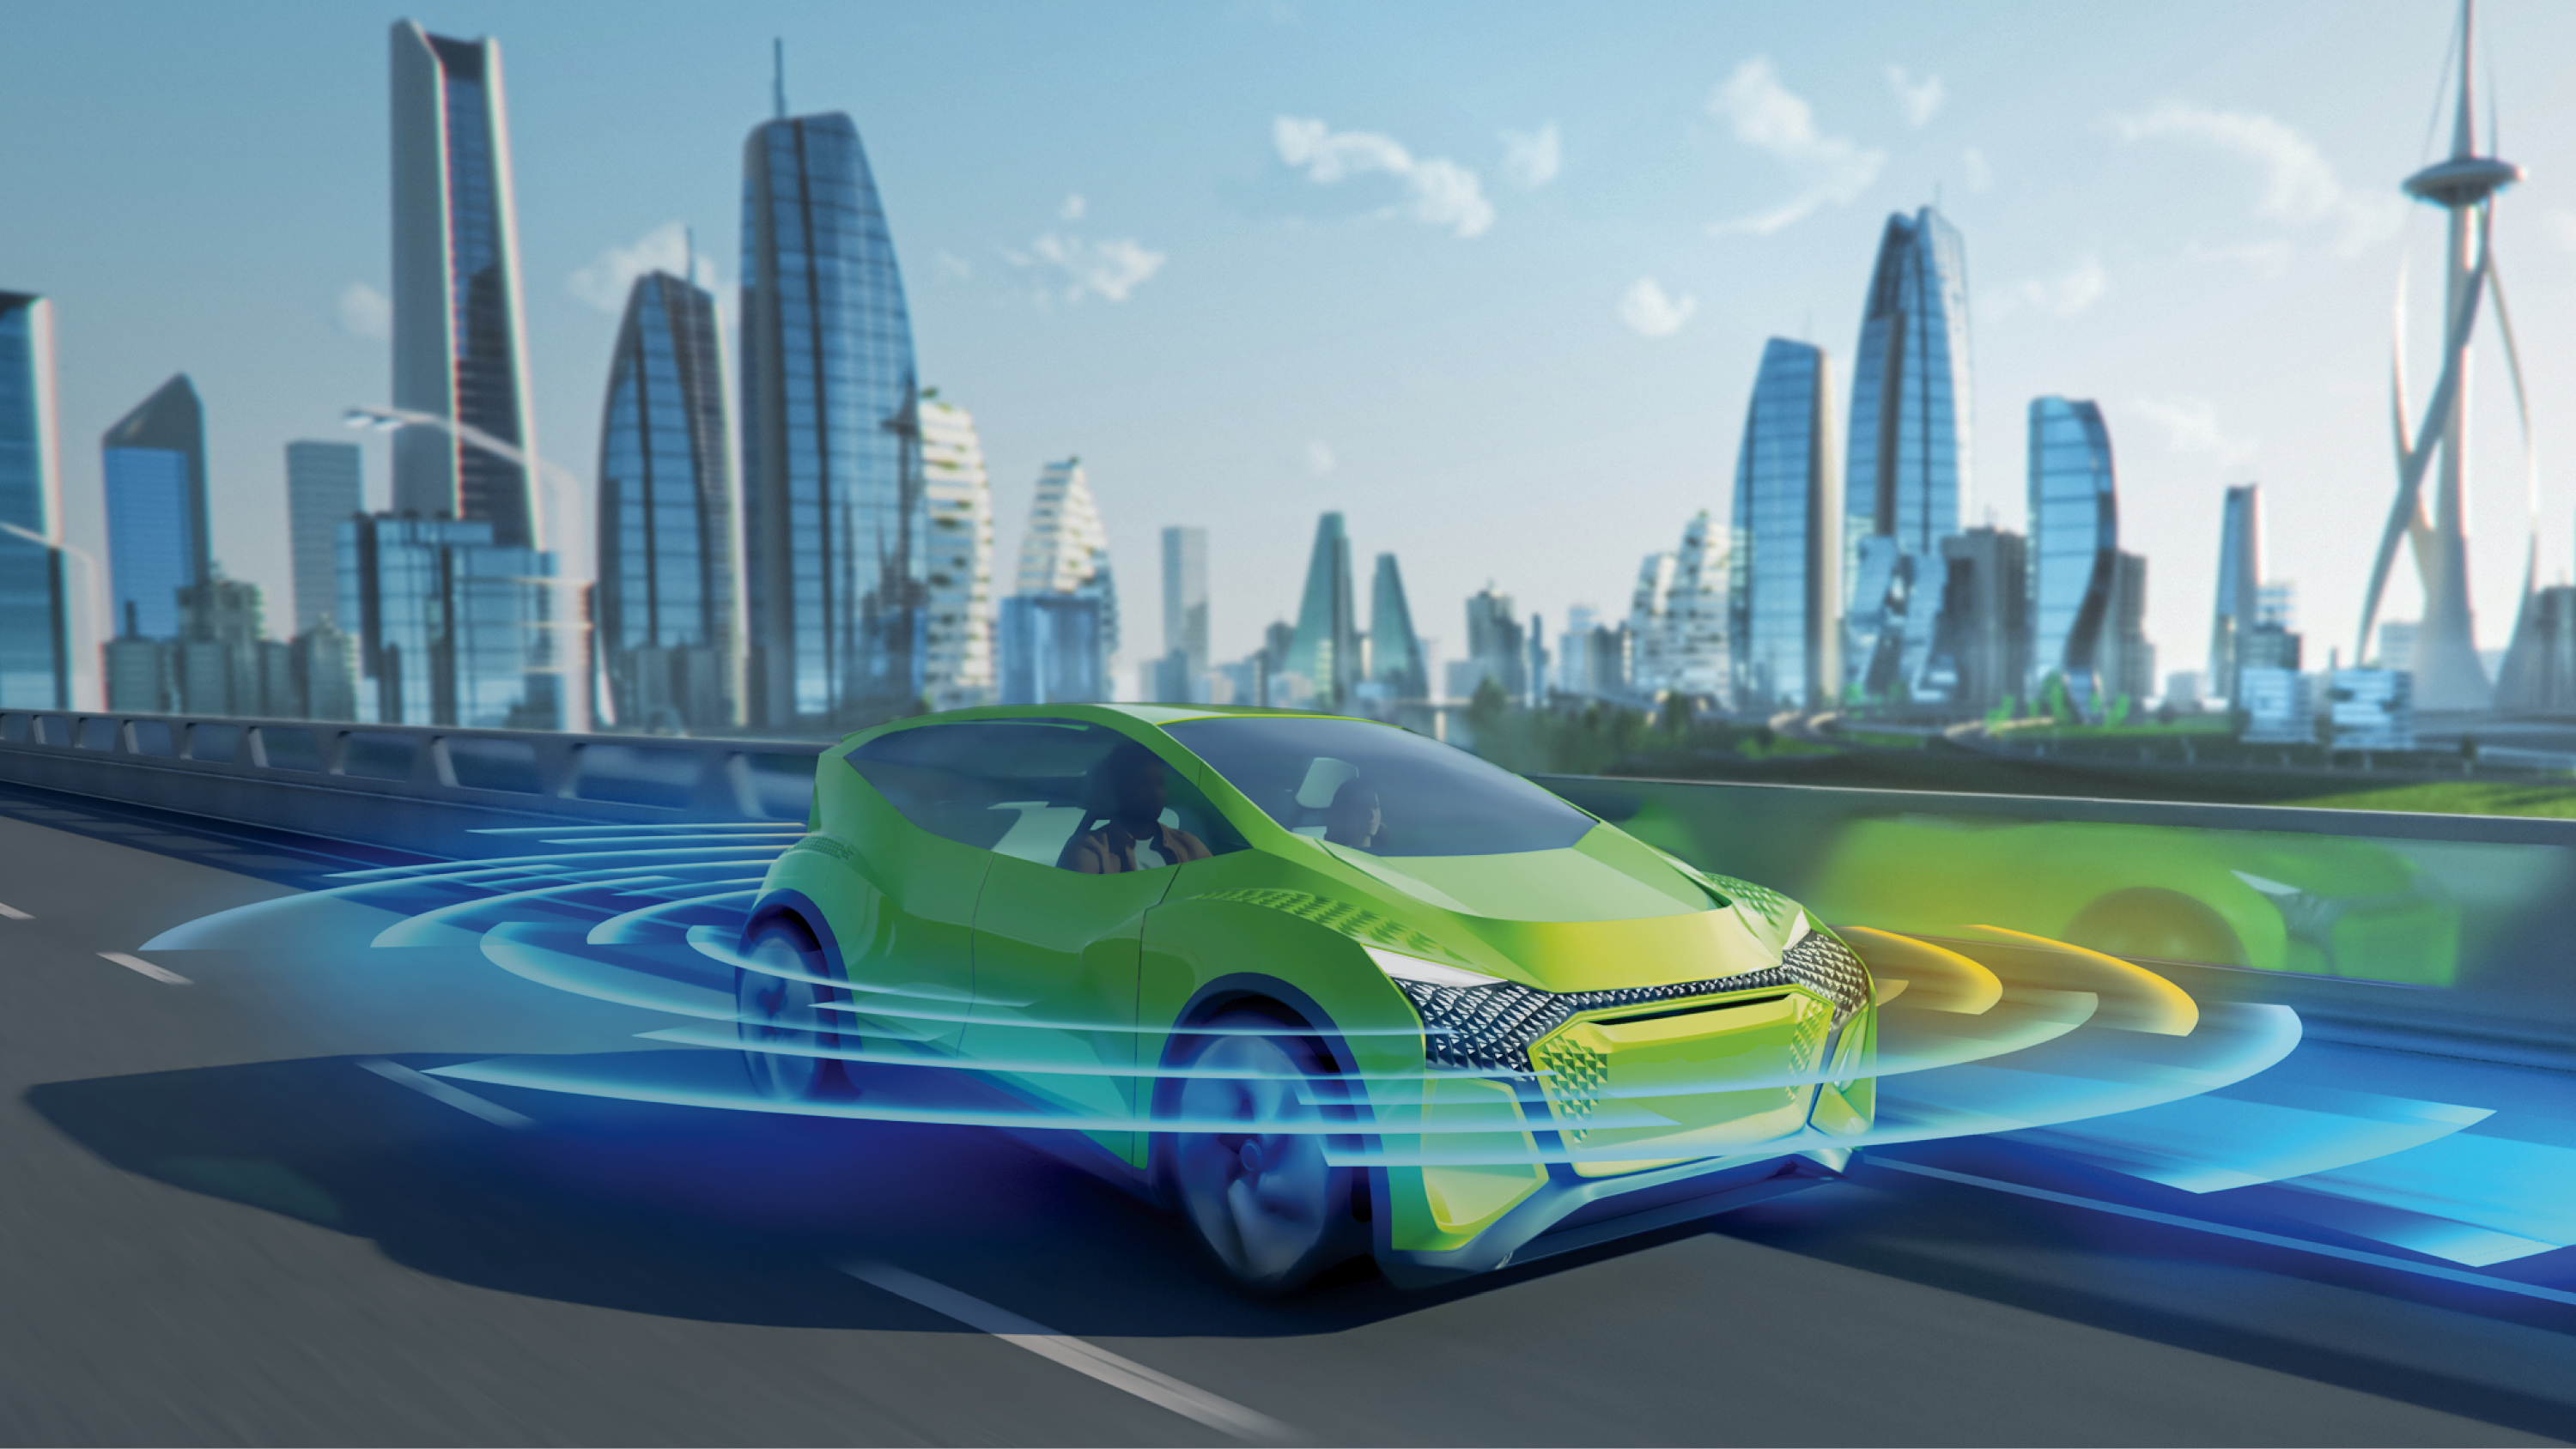 NXP to Implement Distributed Aperture Radar for Automated Driving